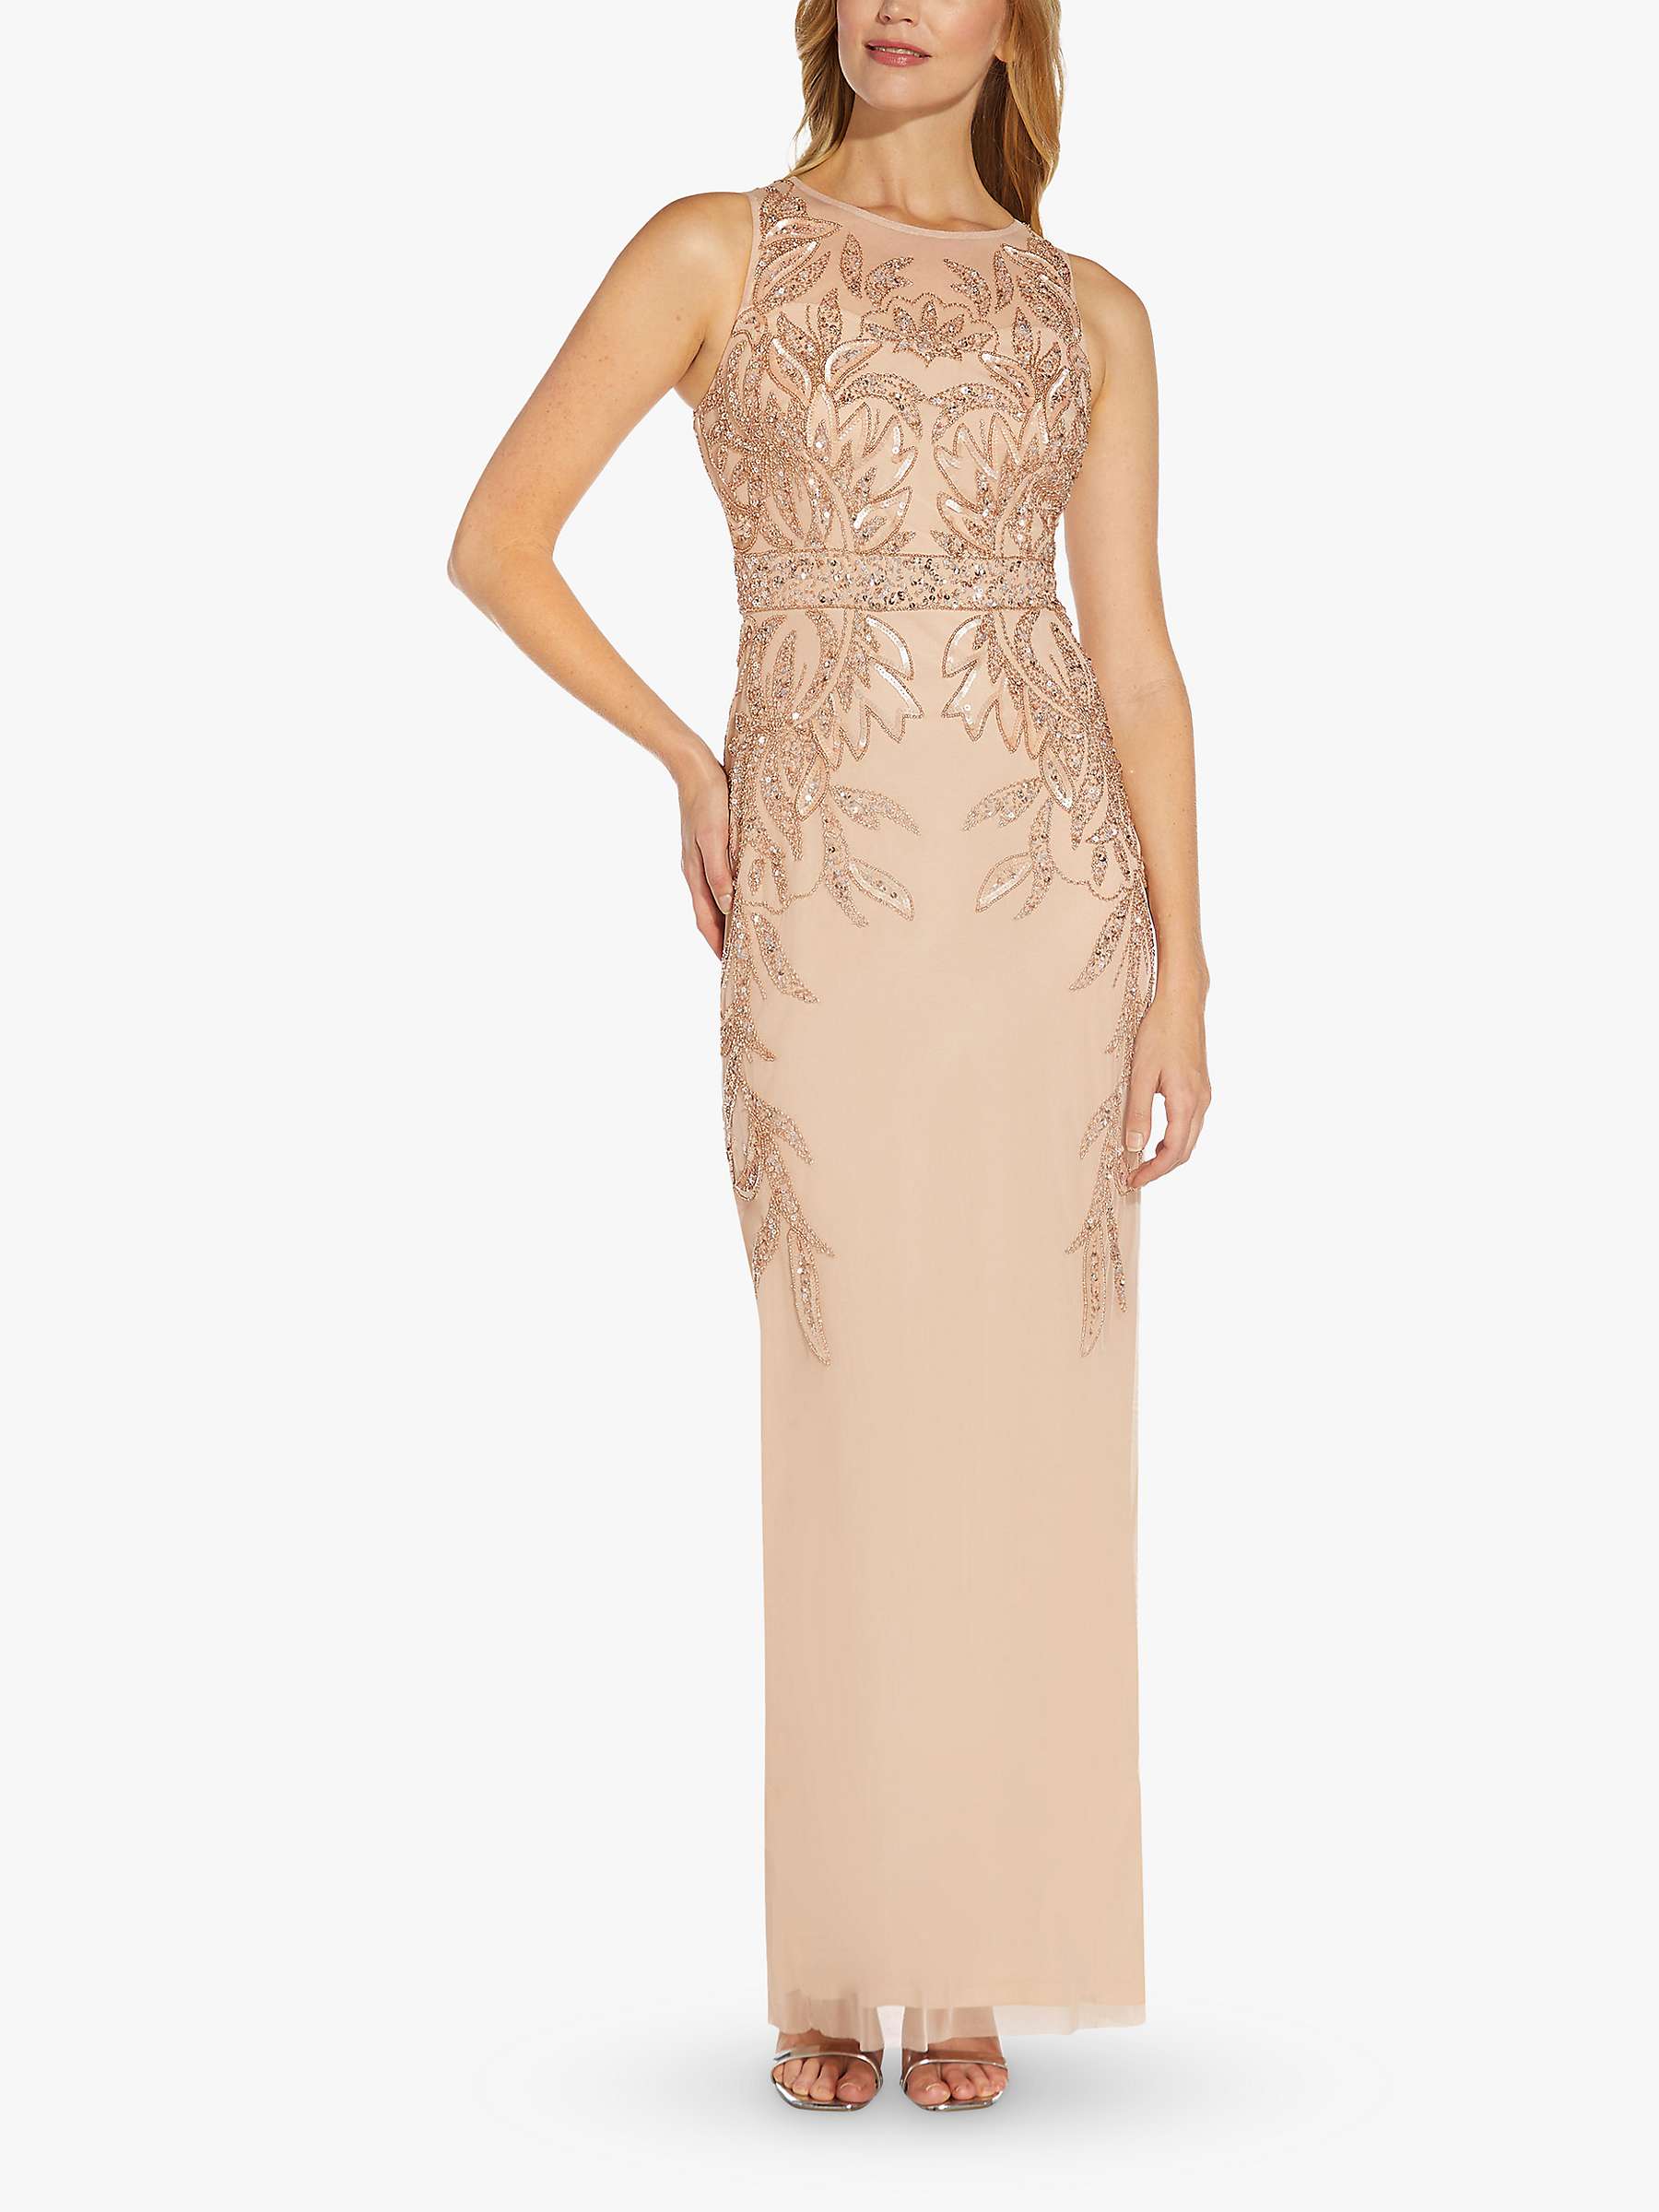 Buy Adrianna Papell Papell Studio Beaded Column Dress Online at johnlewis.com